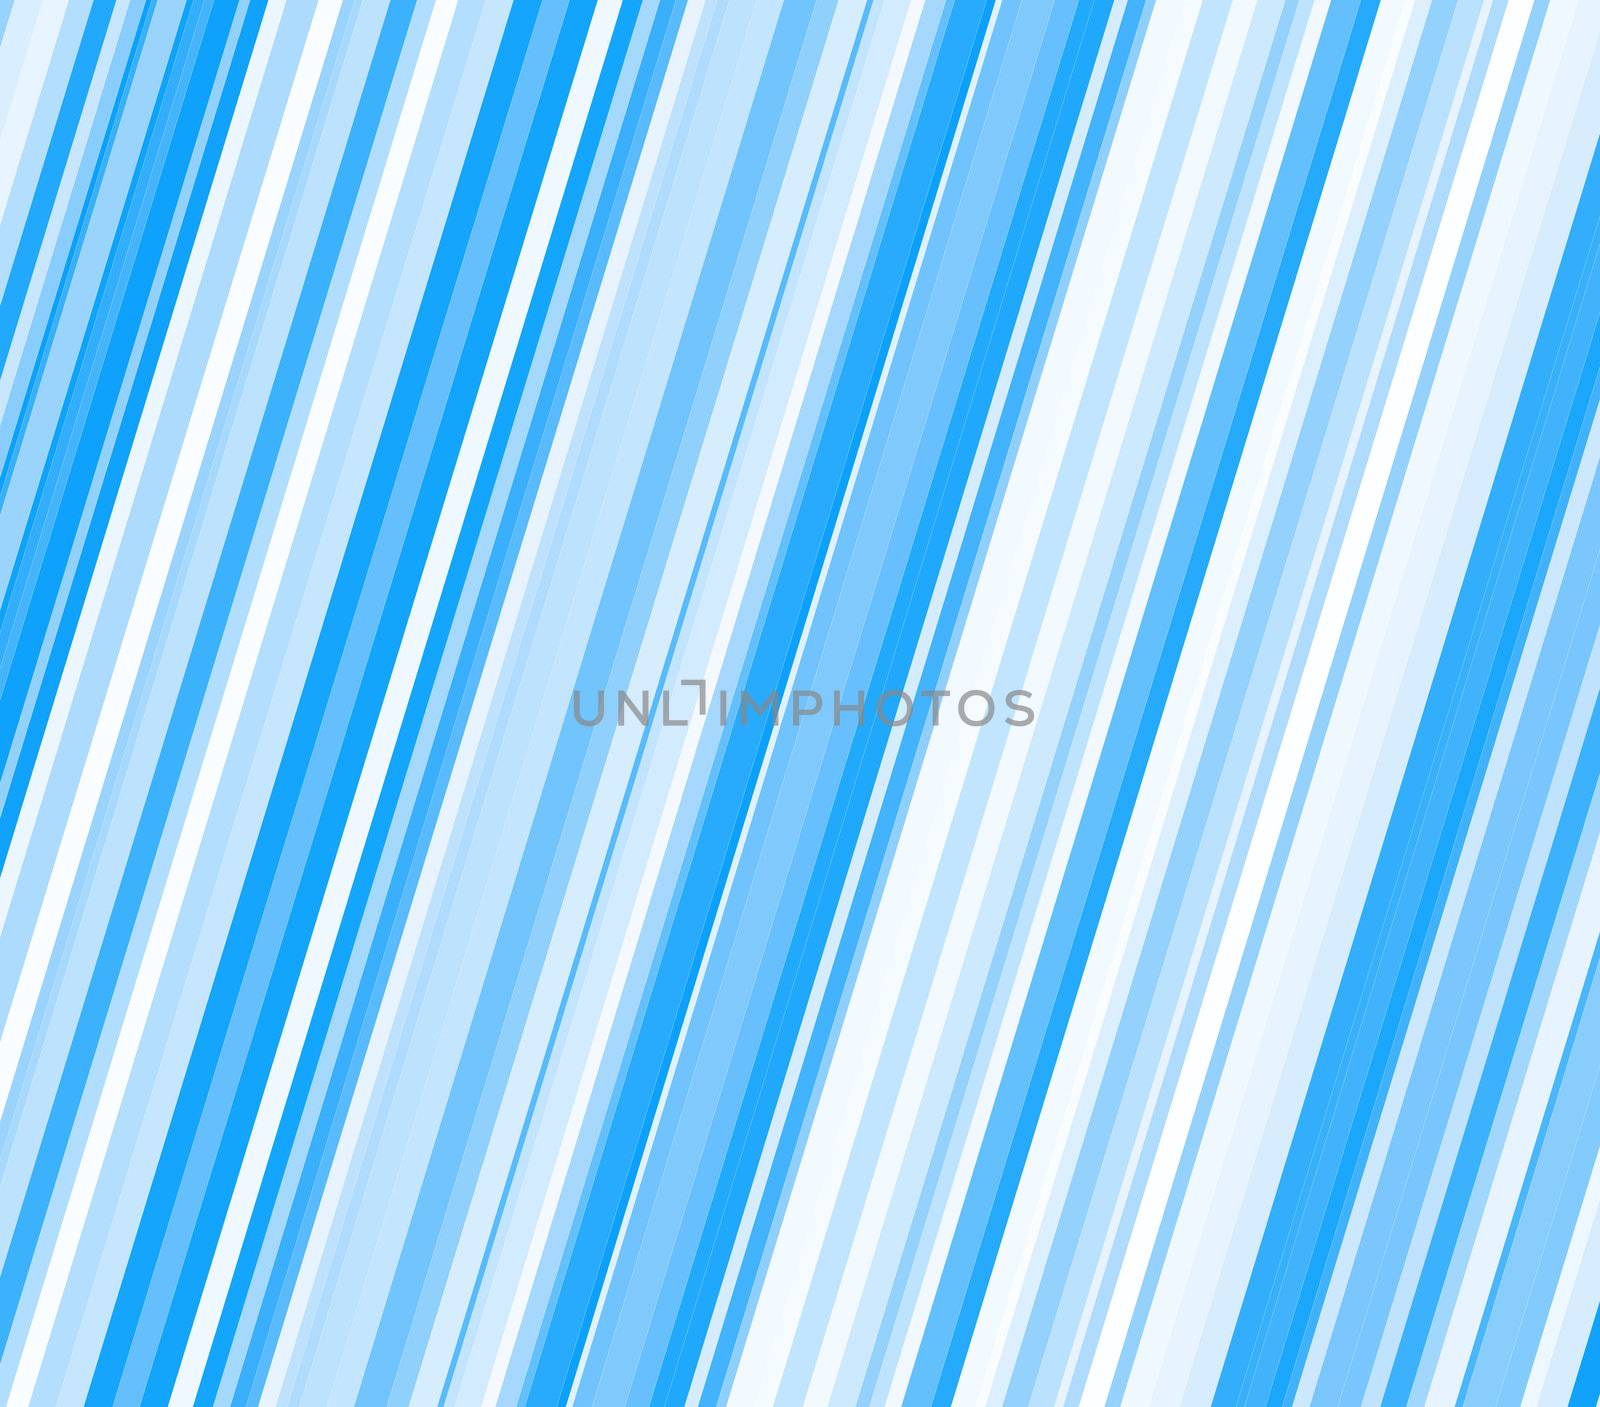 A background texture with blue and white diagonal stripes.